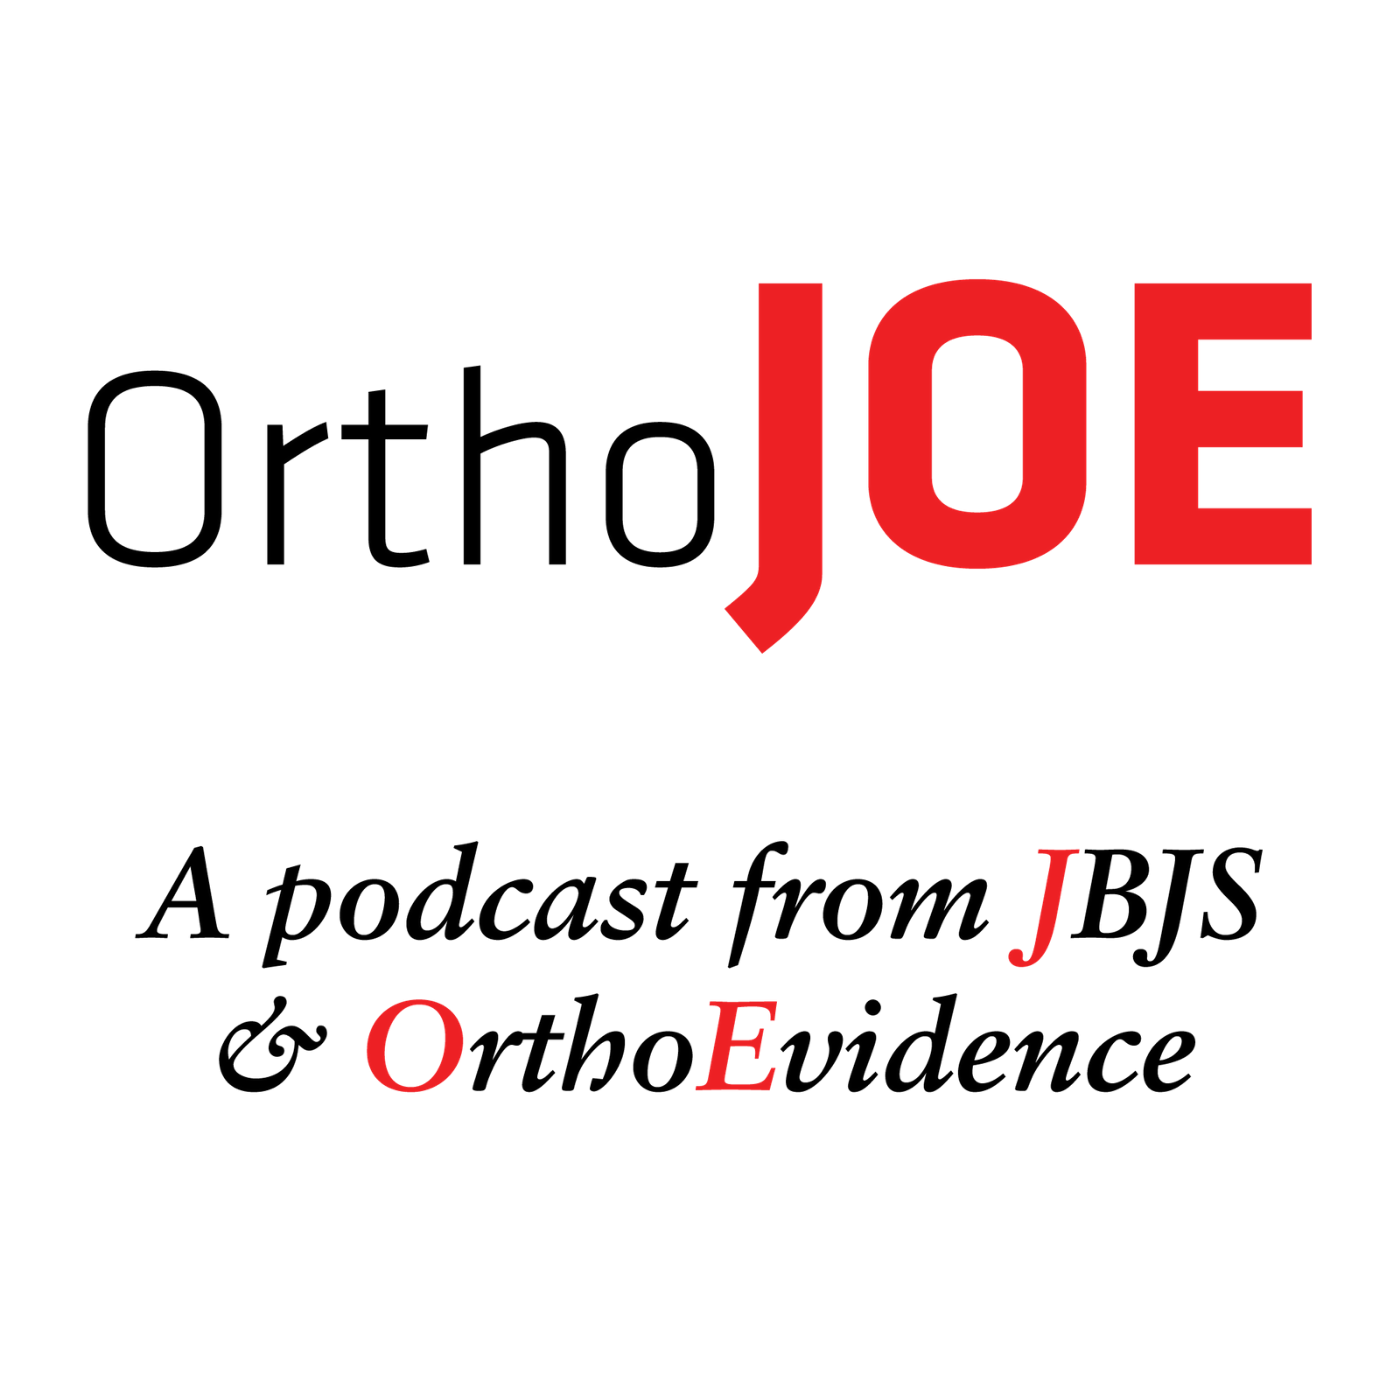 Orthopaedics in India, Injury Prevention, and the Power of Intention with special guest Shanmuganathan Rajasekaran